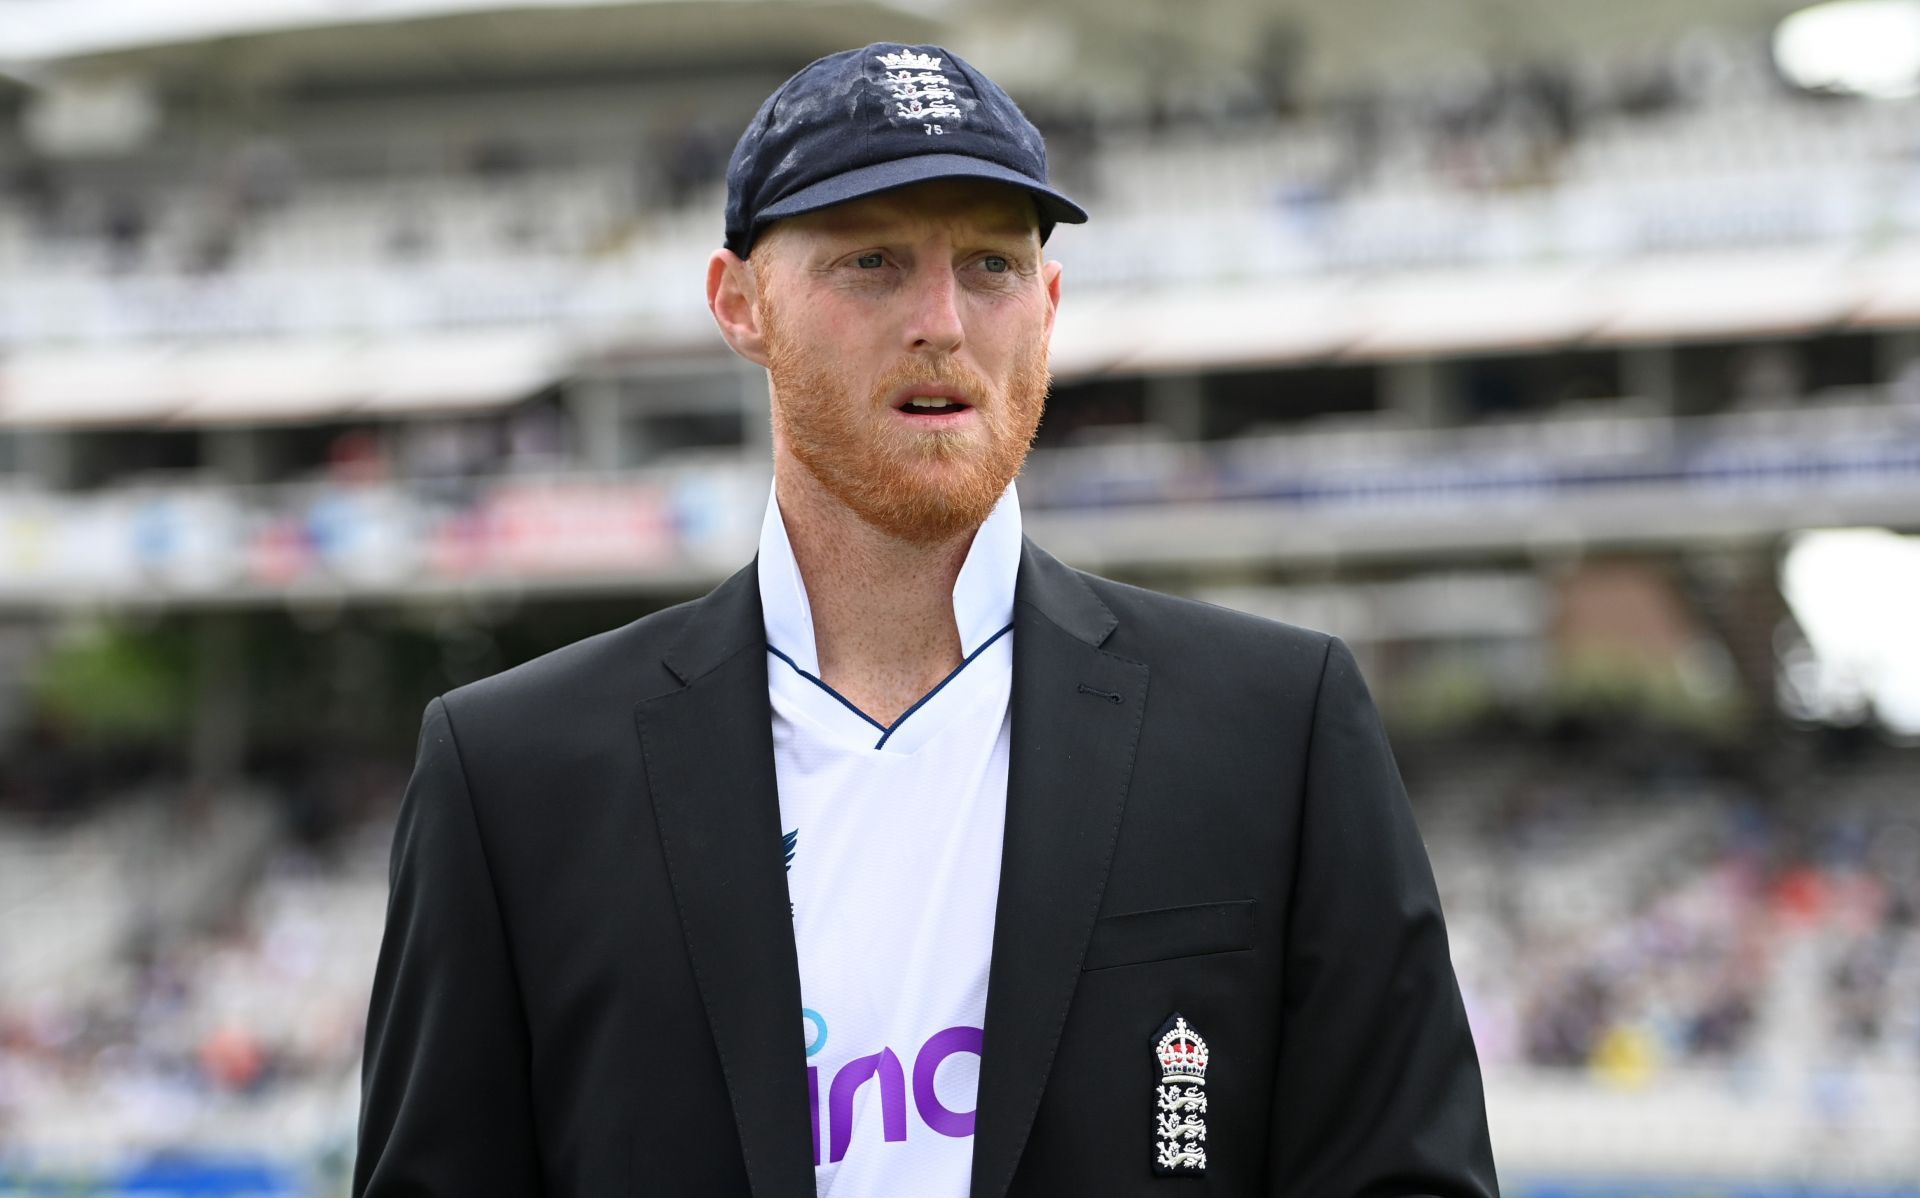 Ben Stokes had things under control on his first day as England captain